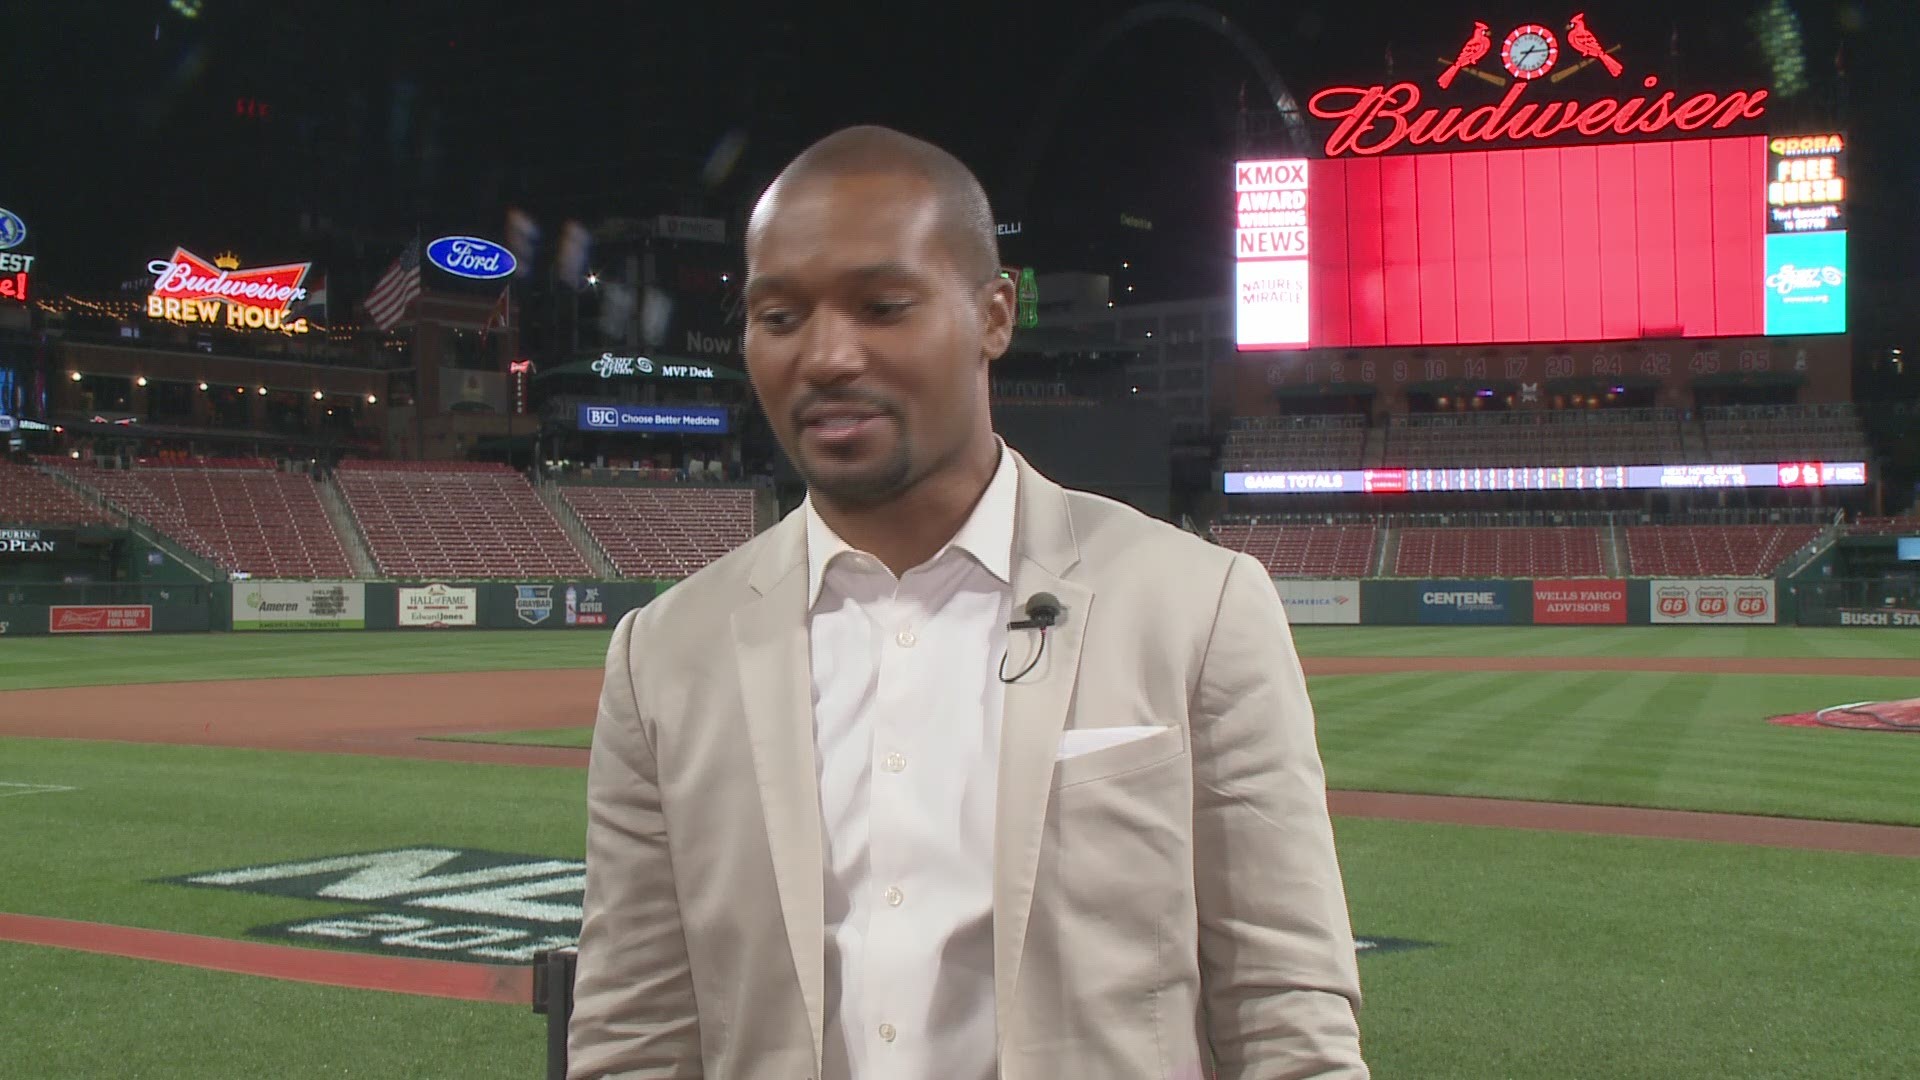 Sports reporter Darren Haynes talked to the Nationals in St. Louis about their reactions to their second win in the NLCS.